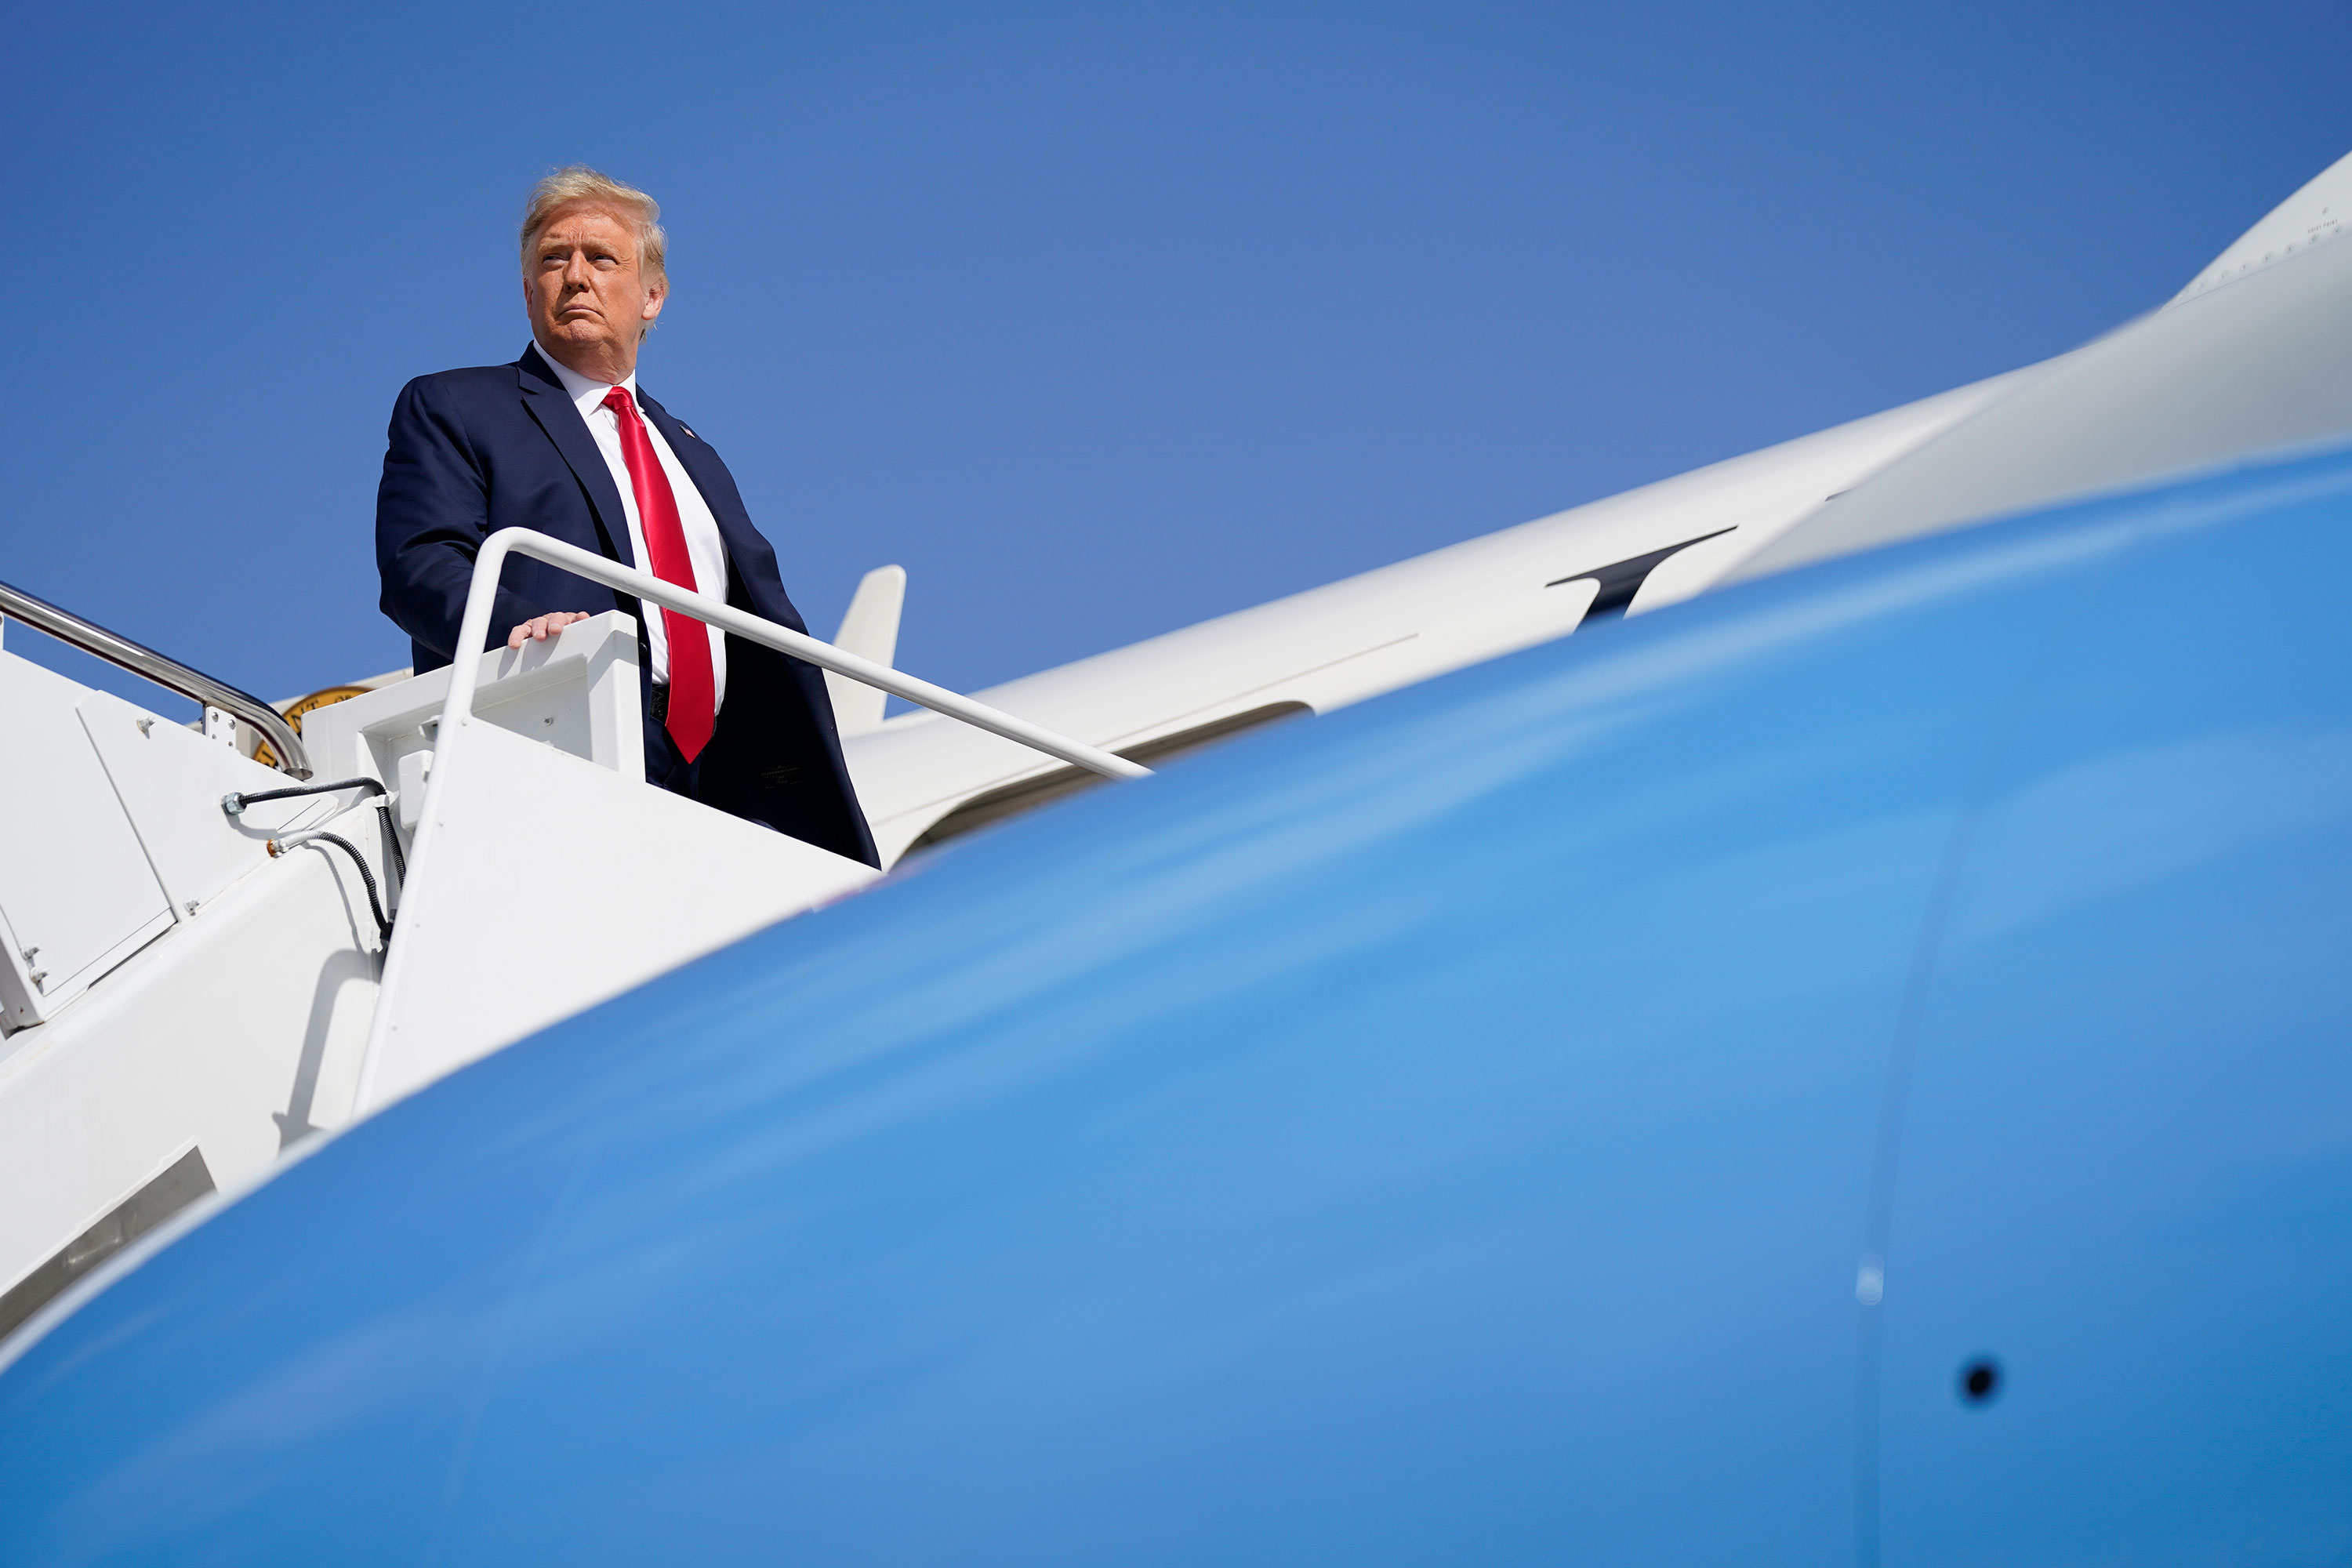 President Donald Trump boards Air Force One at Andrews Air Force Base to travel to campaign rallies in Florida on October 23. 